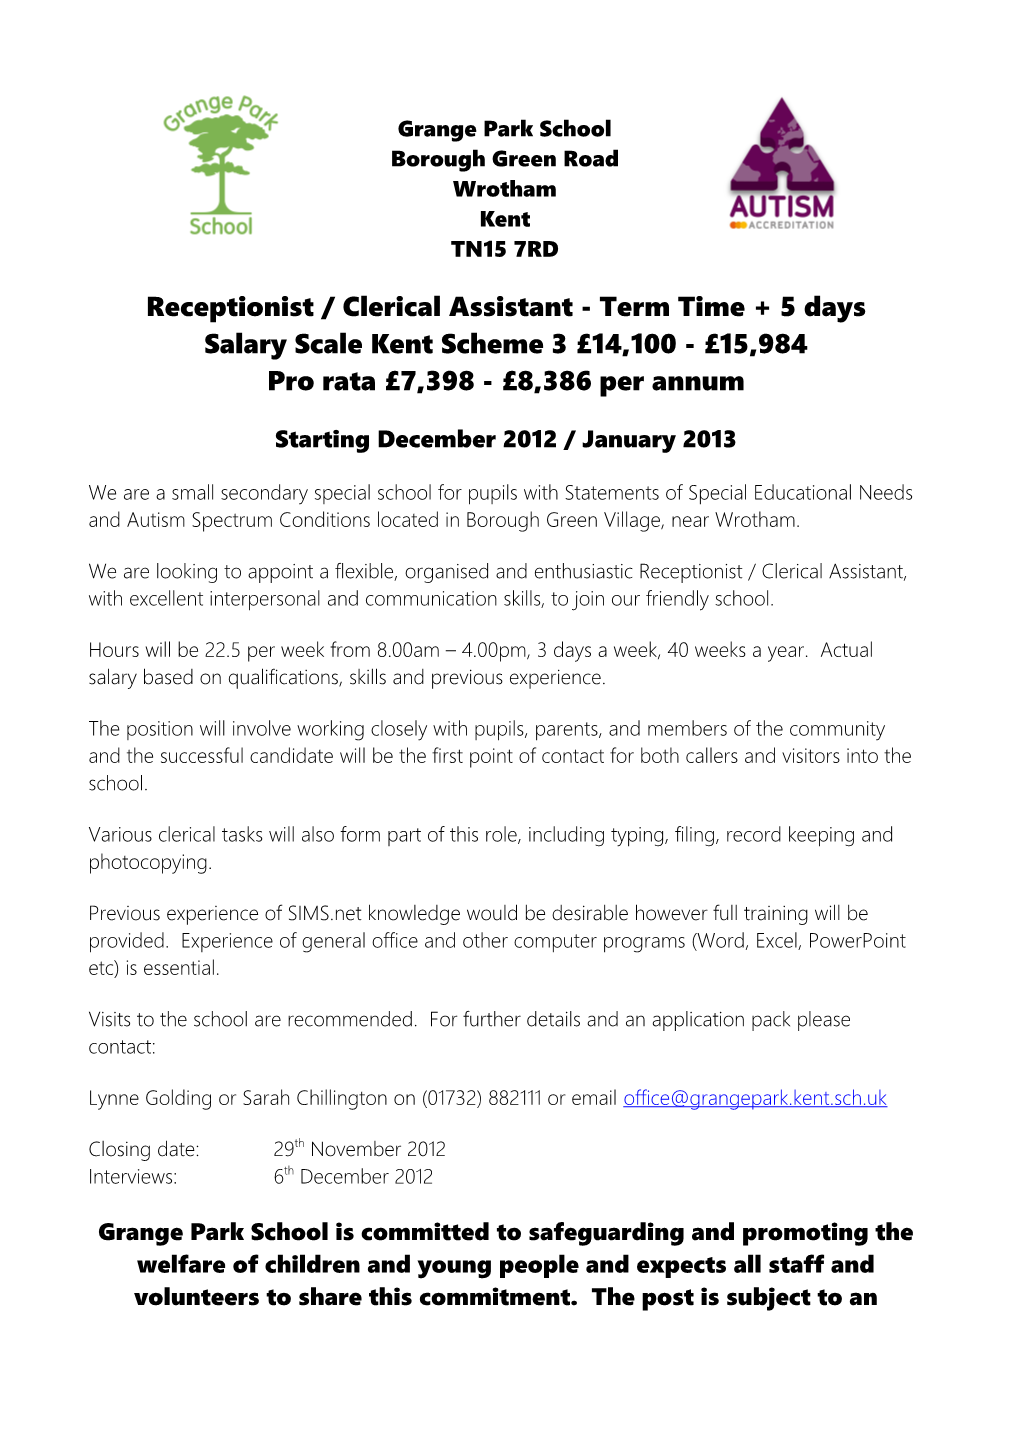 Receptionist / Clerical Assistant - Term Time + 5 Days